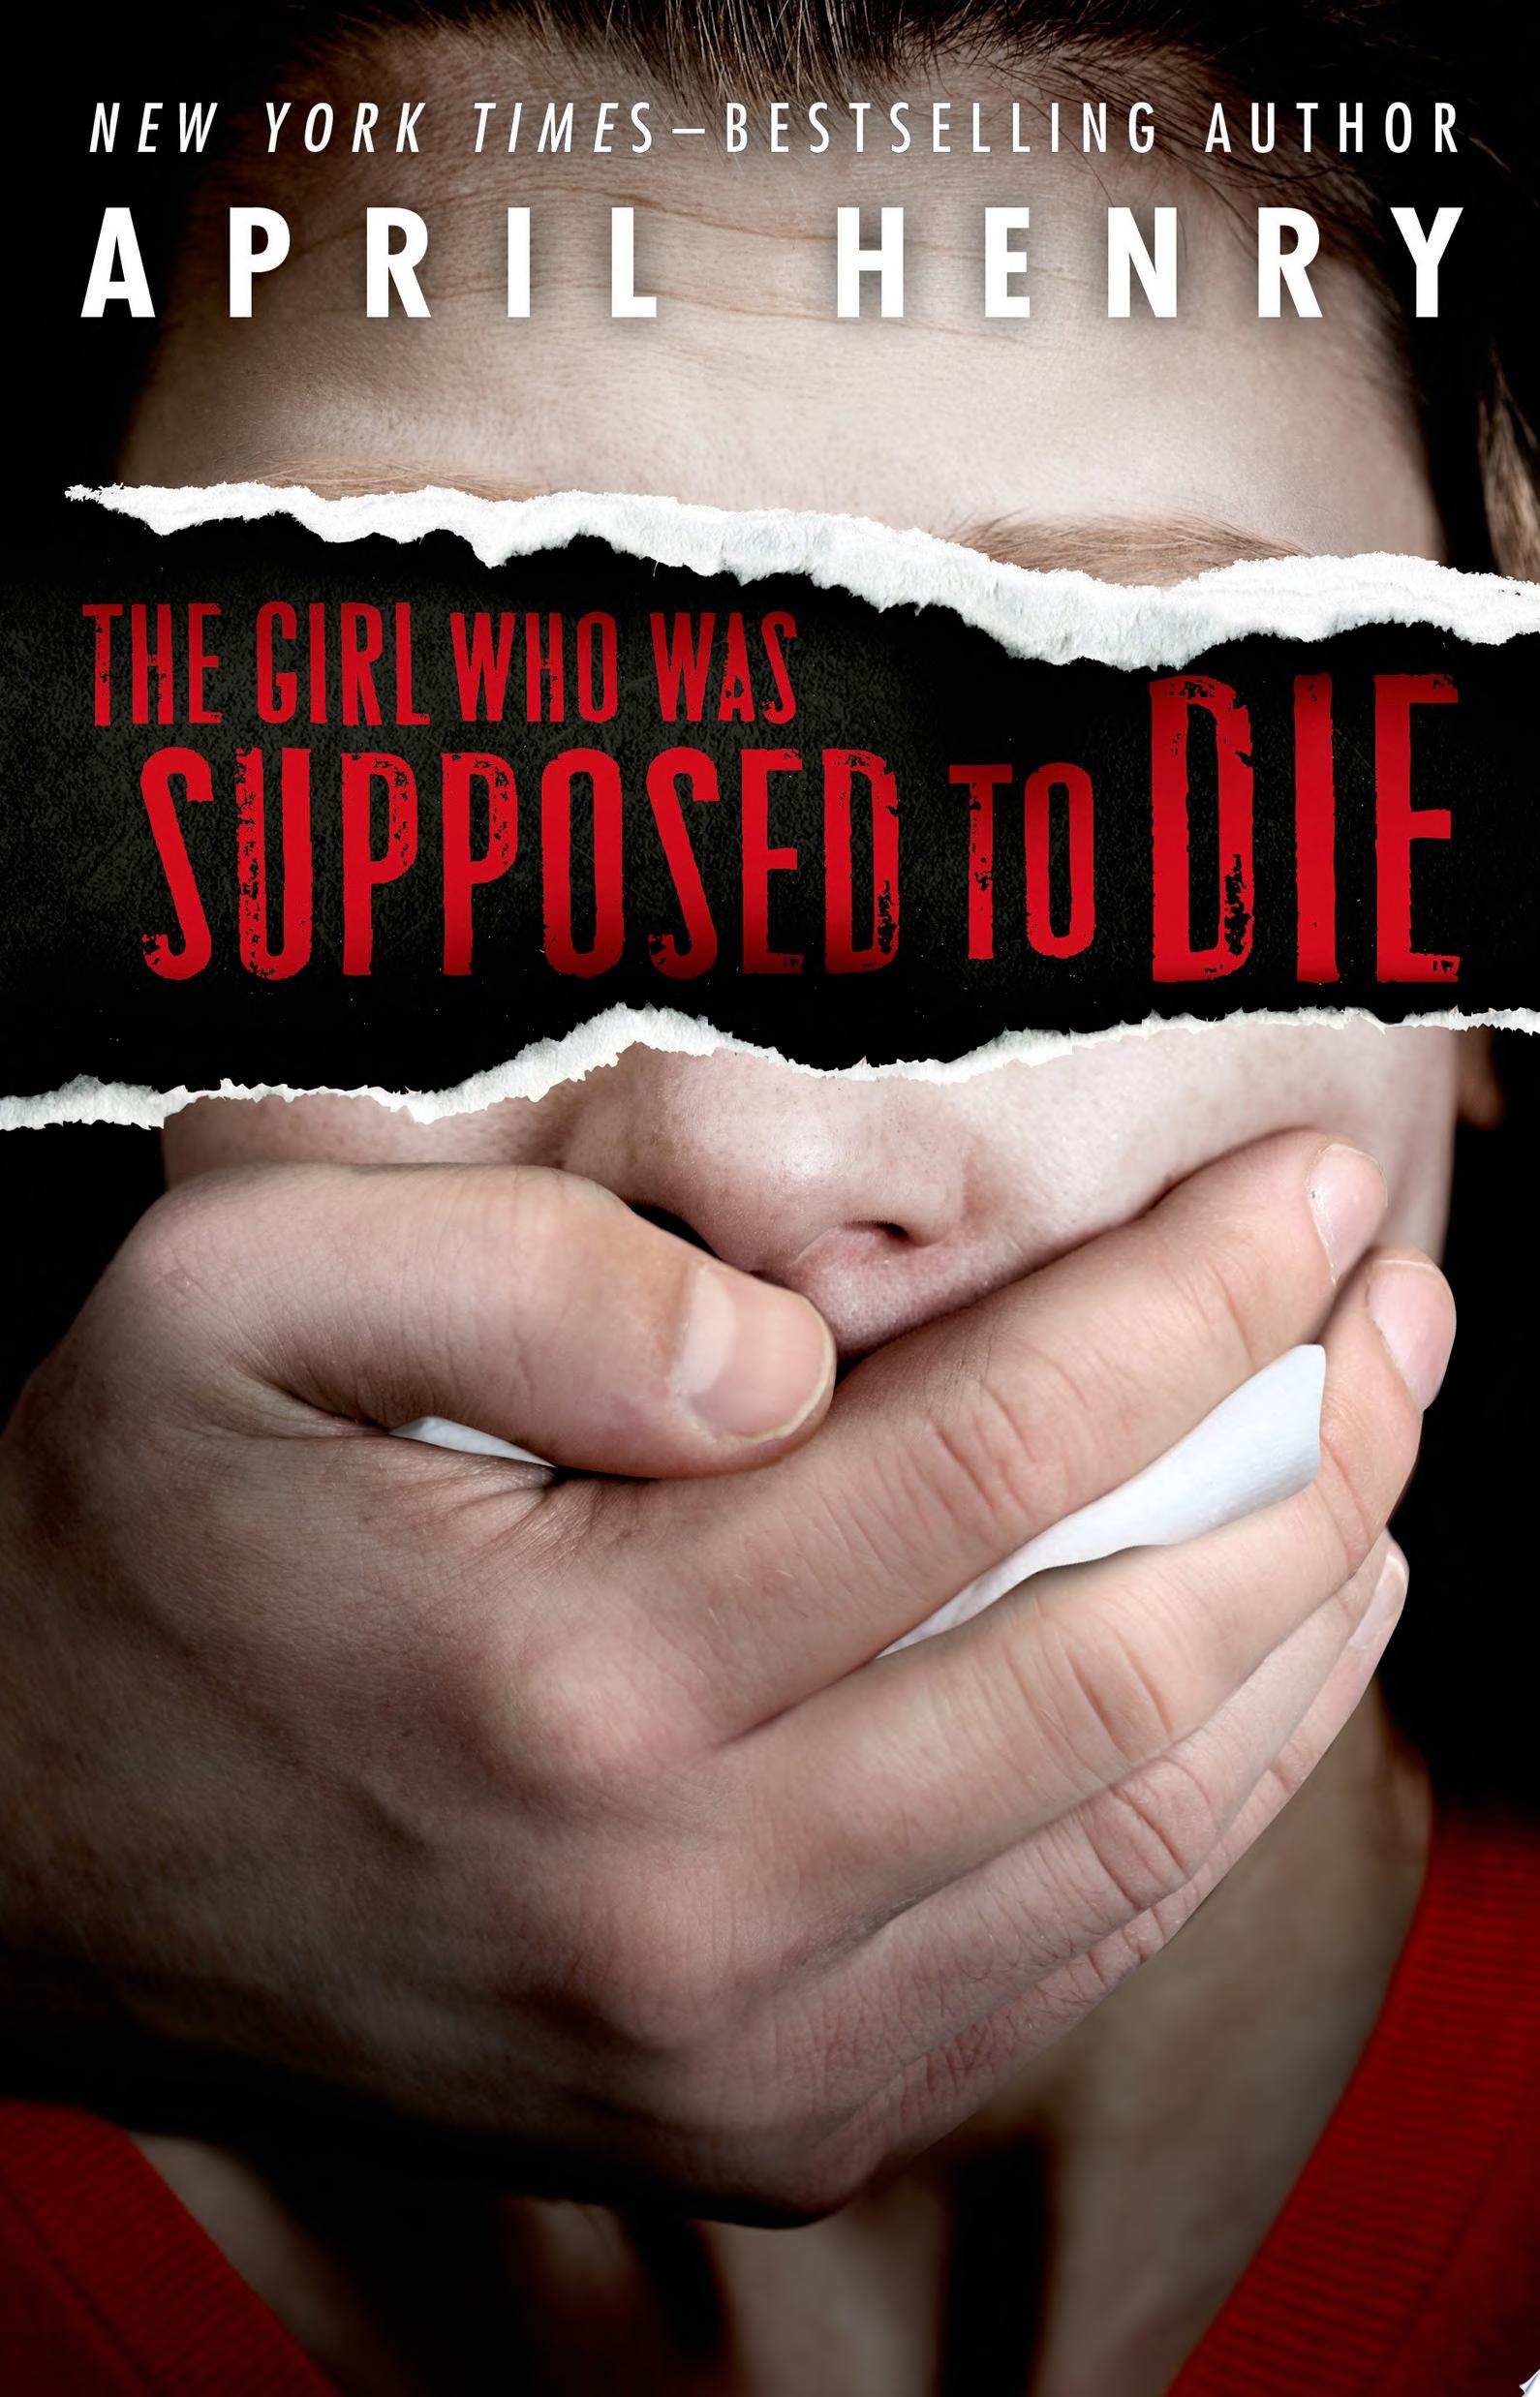 Image for "The Girl Who Was Supposed to Die"